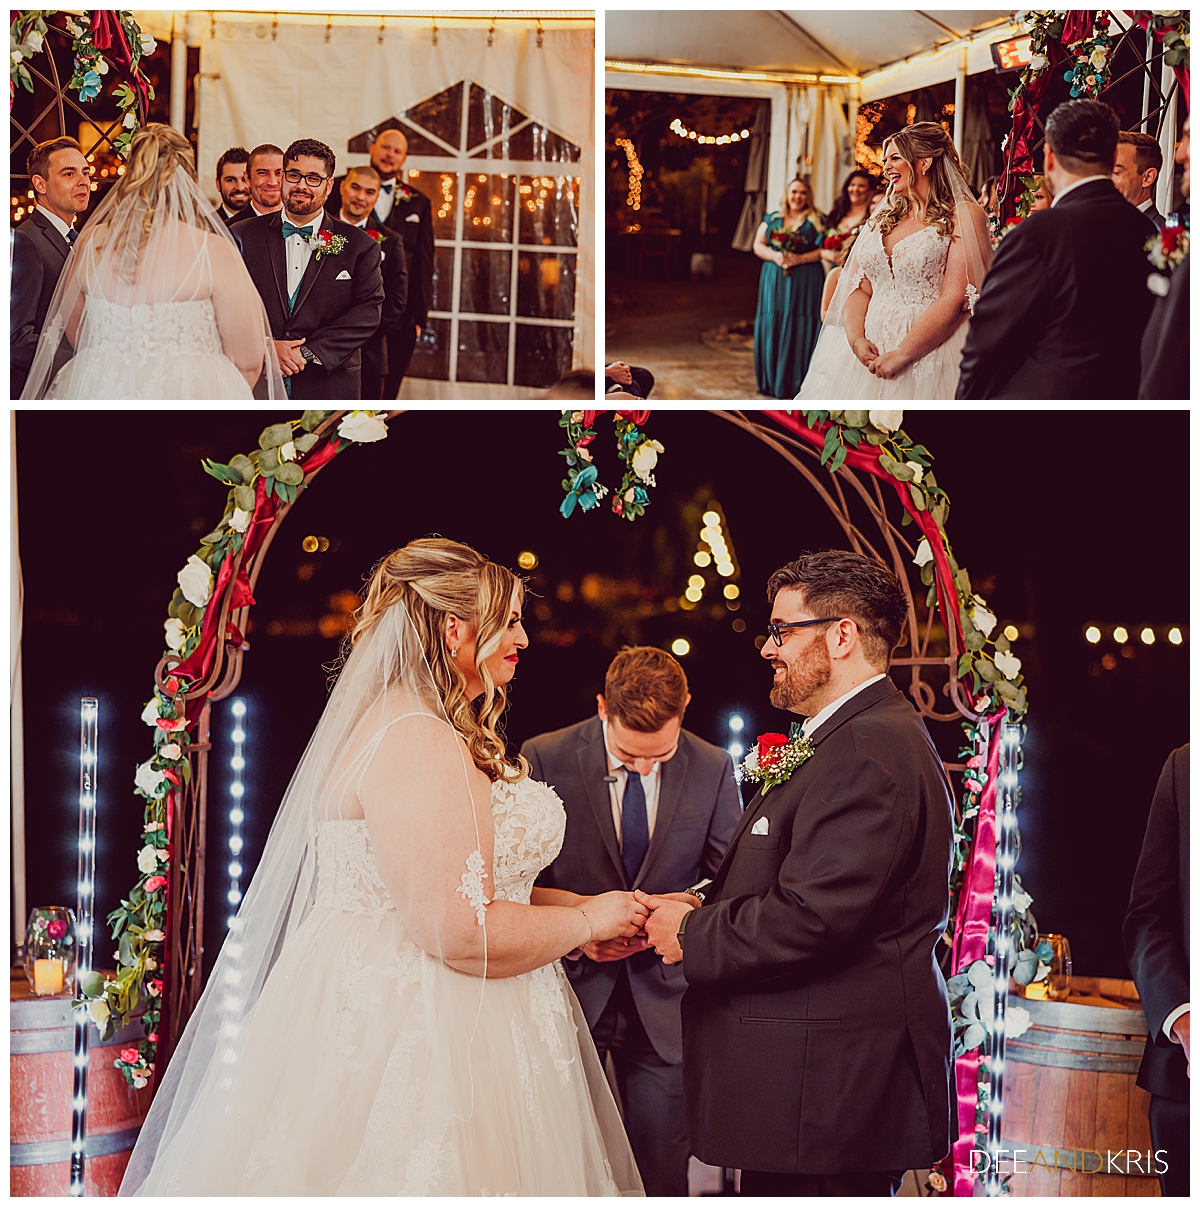 Three images: Top left image of groom saying vows with groomsmen watching behind him. Top right image of bride laughing as she looks at guests while saying vows. Bottom image of ring exchange.